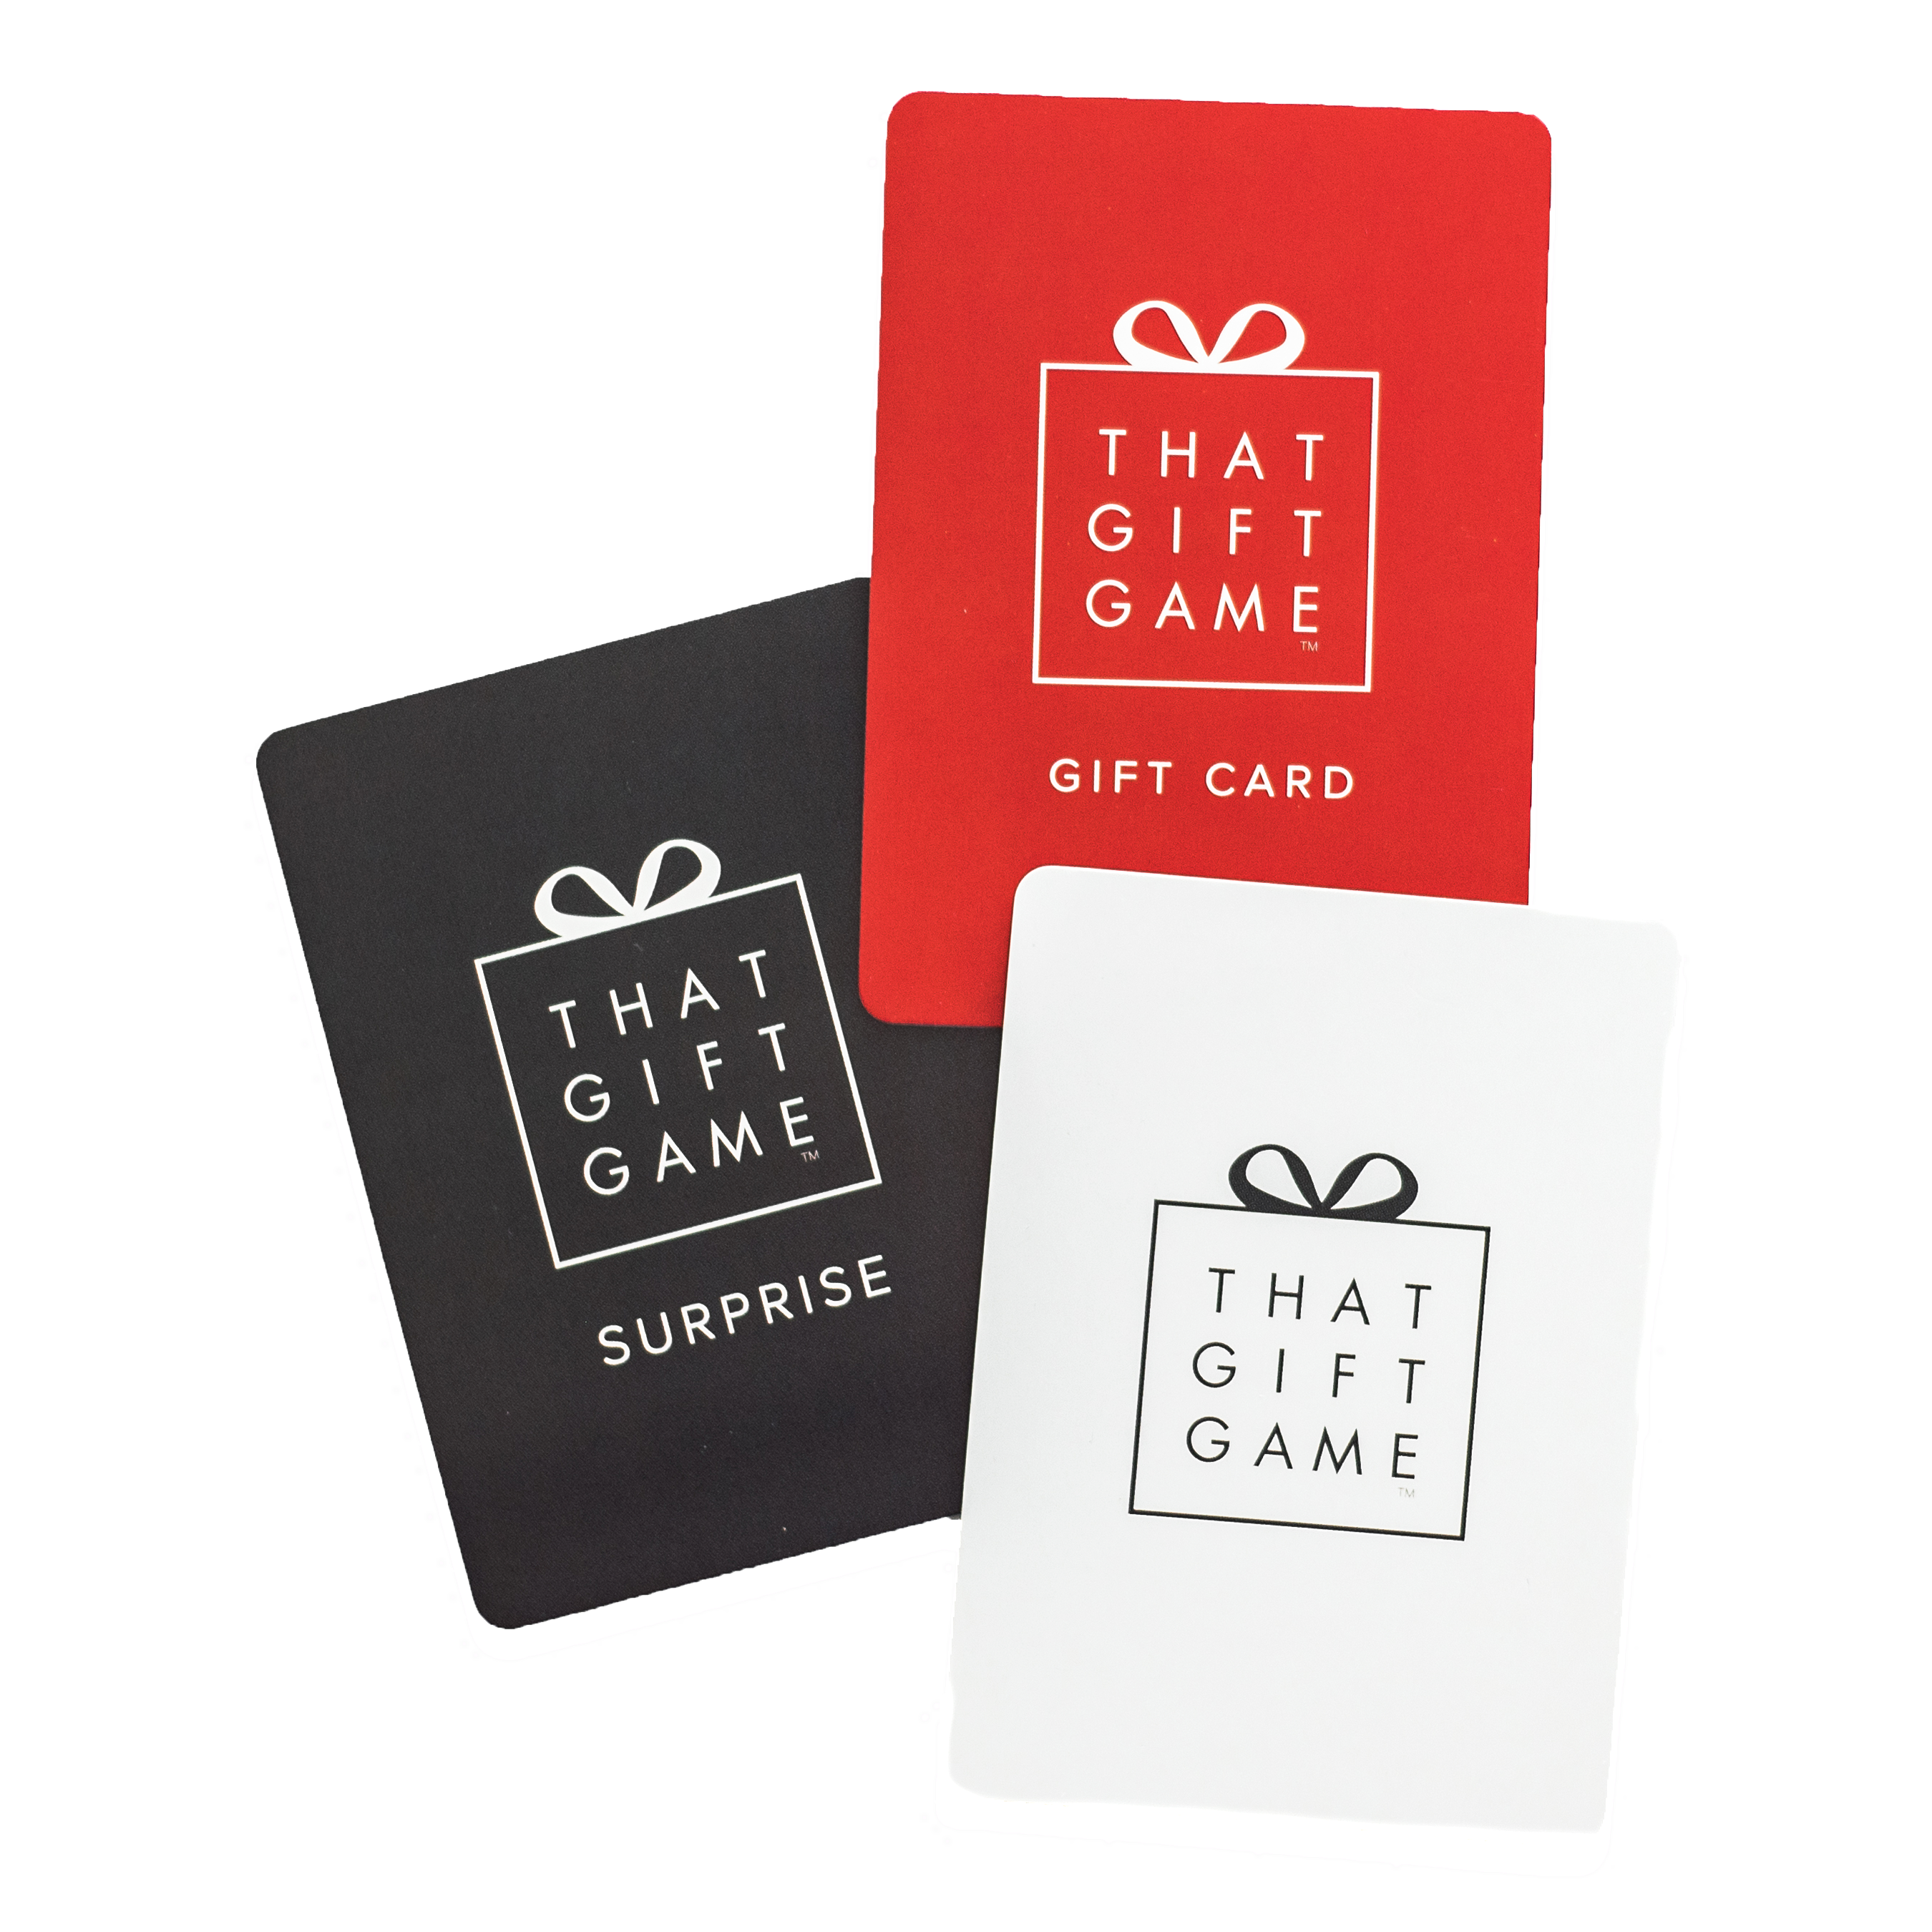 Cards for gift exchange game and Christmas party game.